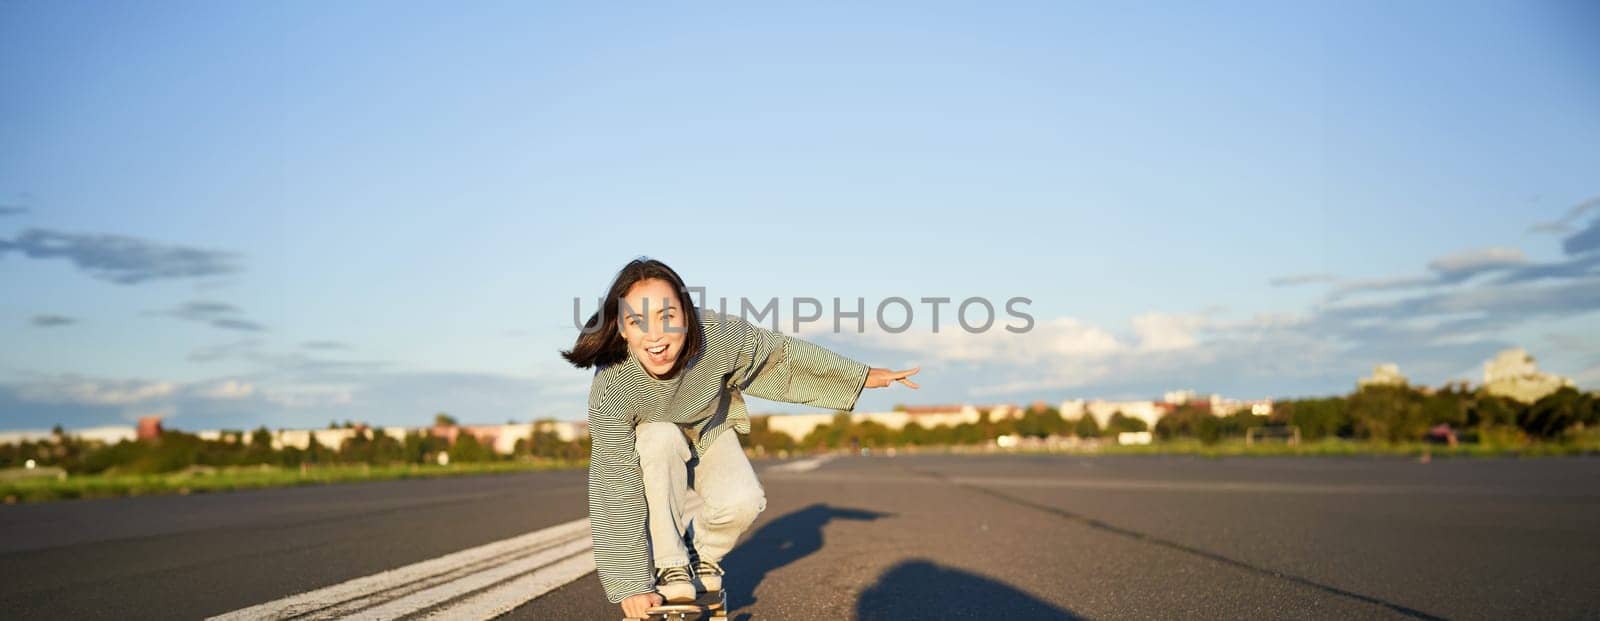 Skater girl riding on skateboard, standing on her longboard and laughing, riding cruiser on an empty street towards the sun.